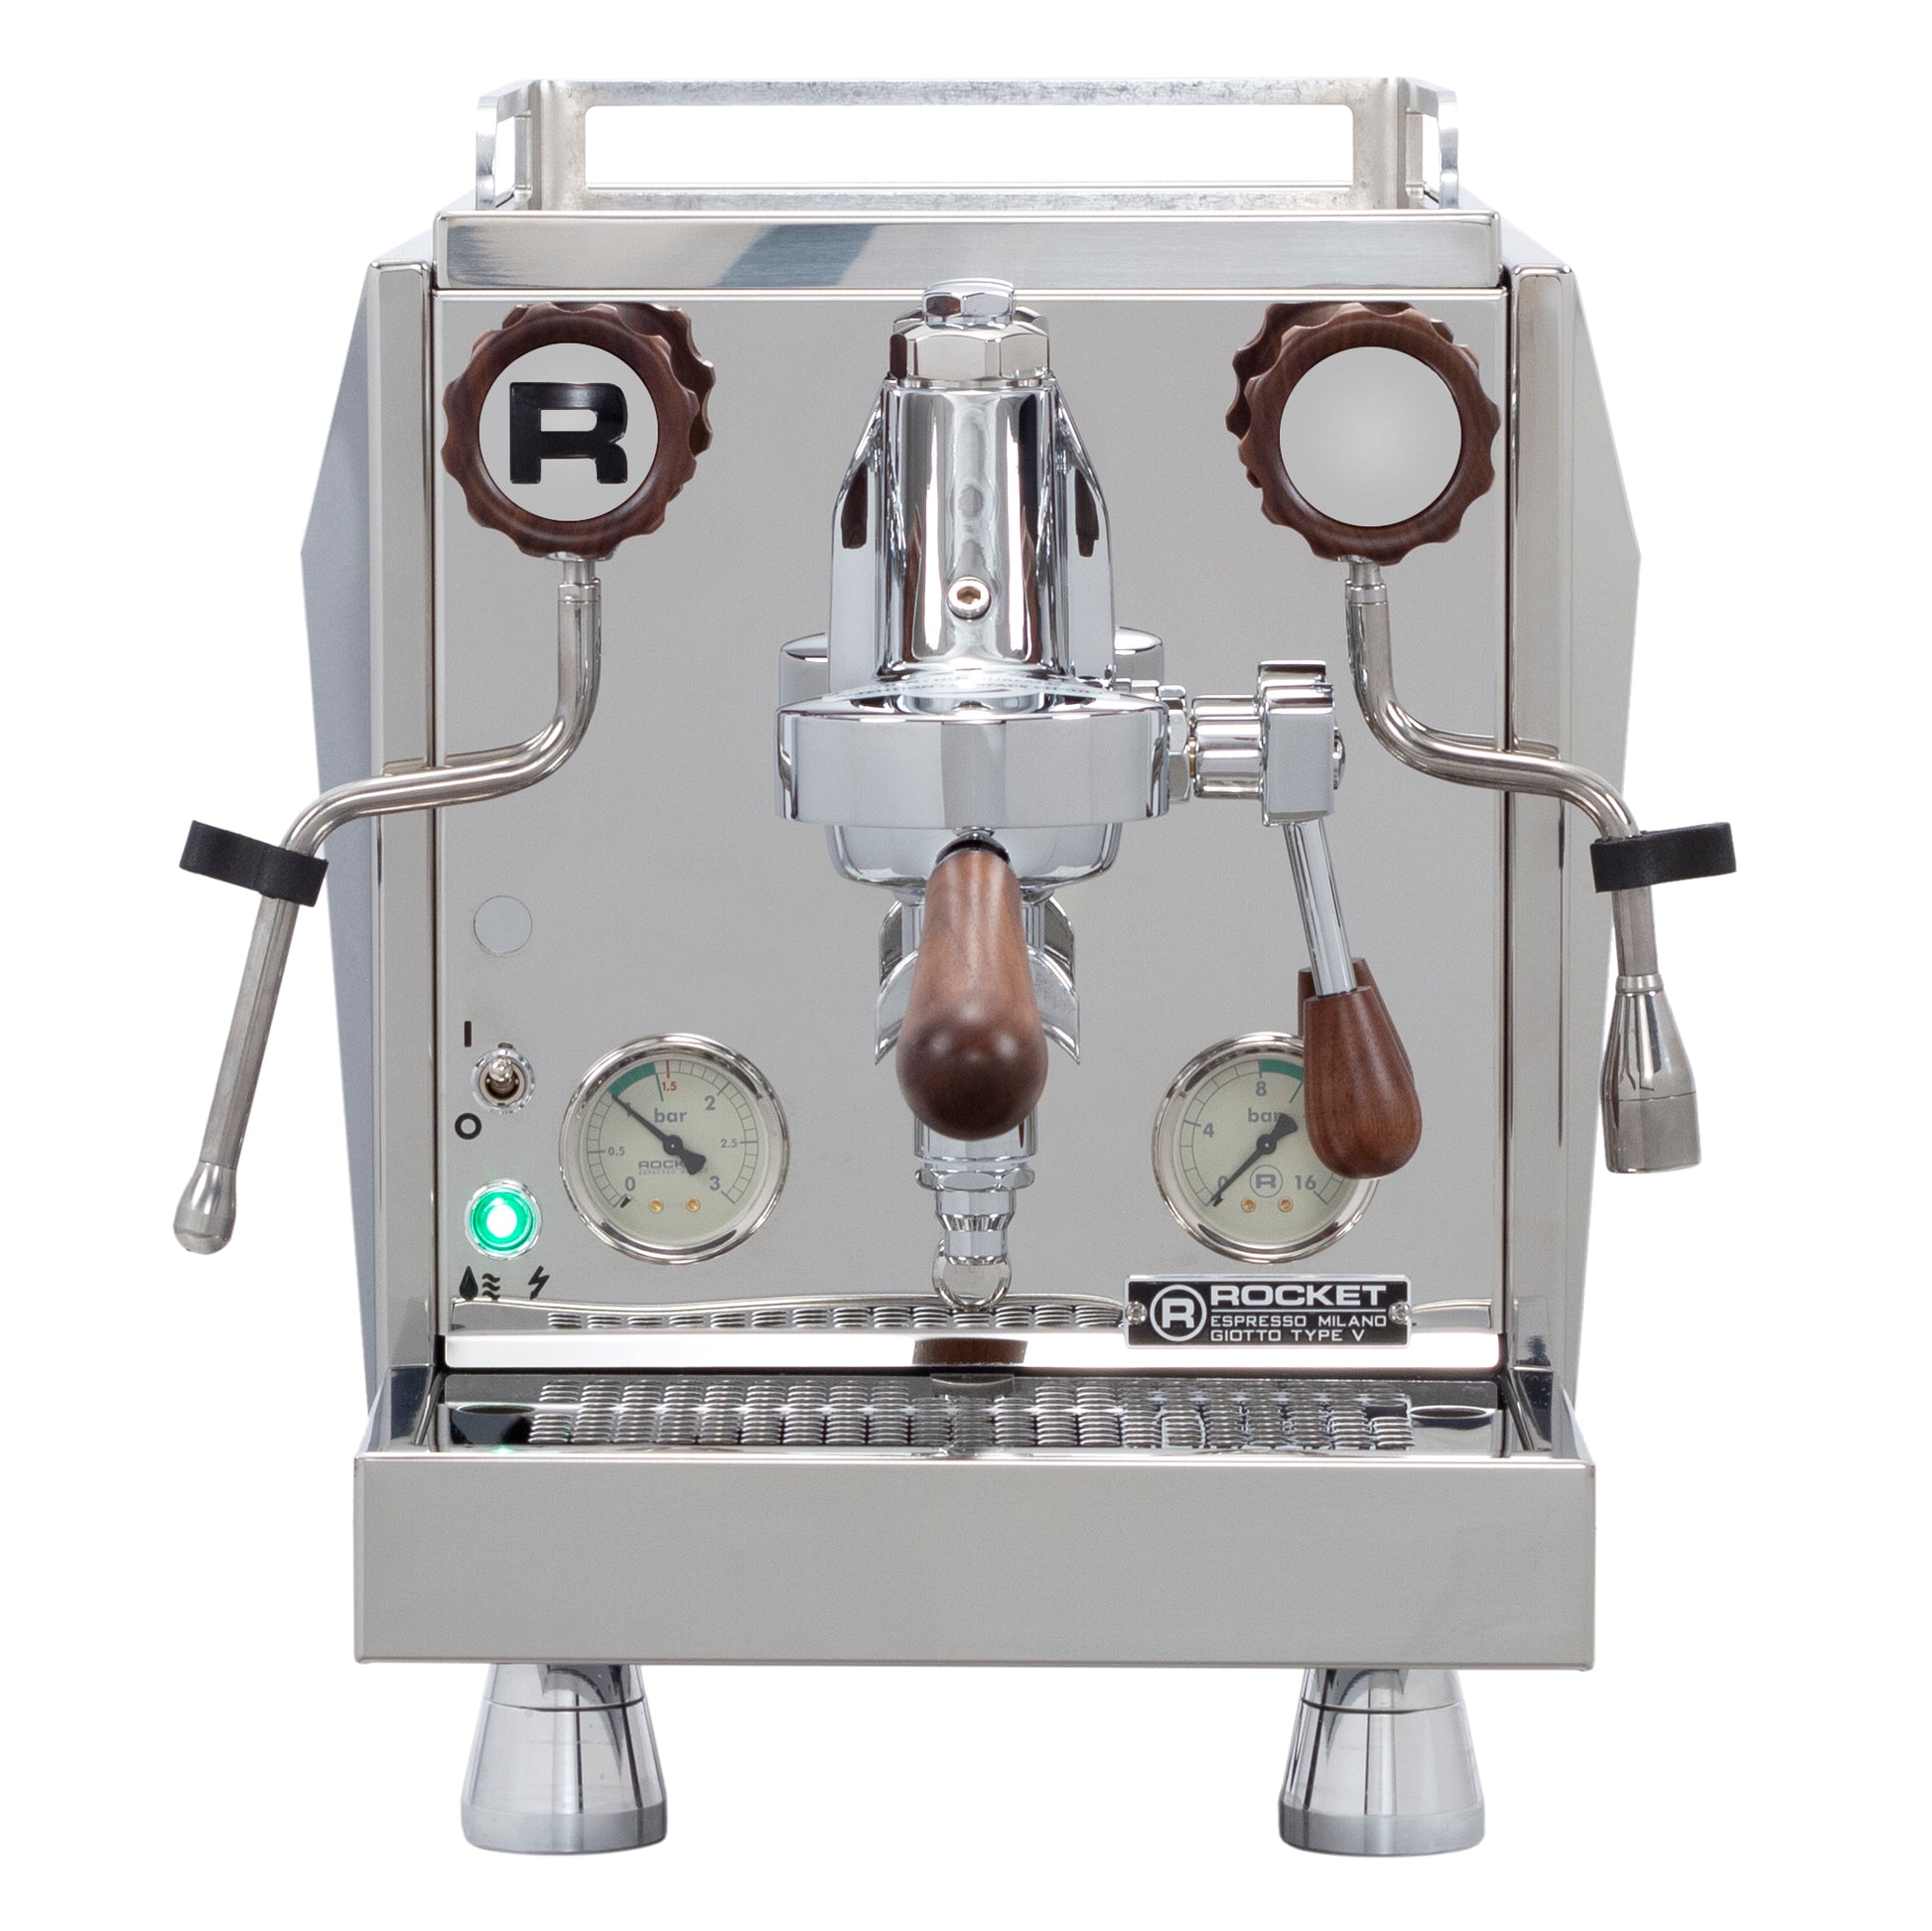 Automatic Magnetic Drive Glass Milk Frother Italian Style Latte